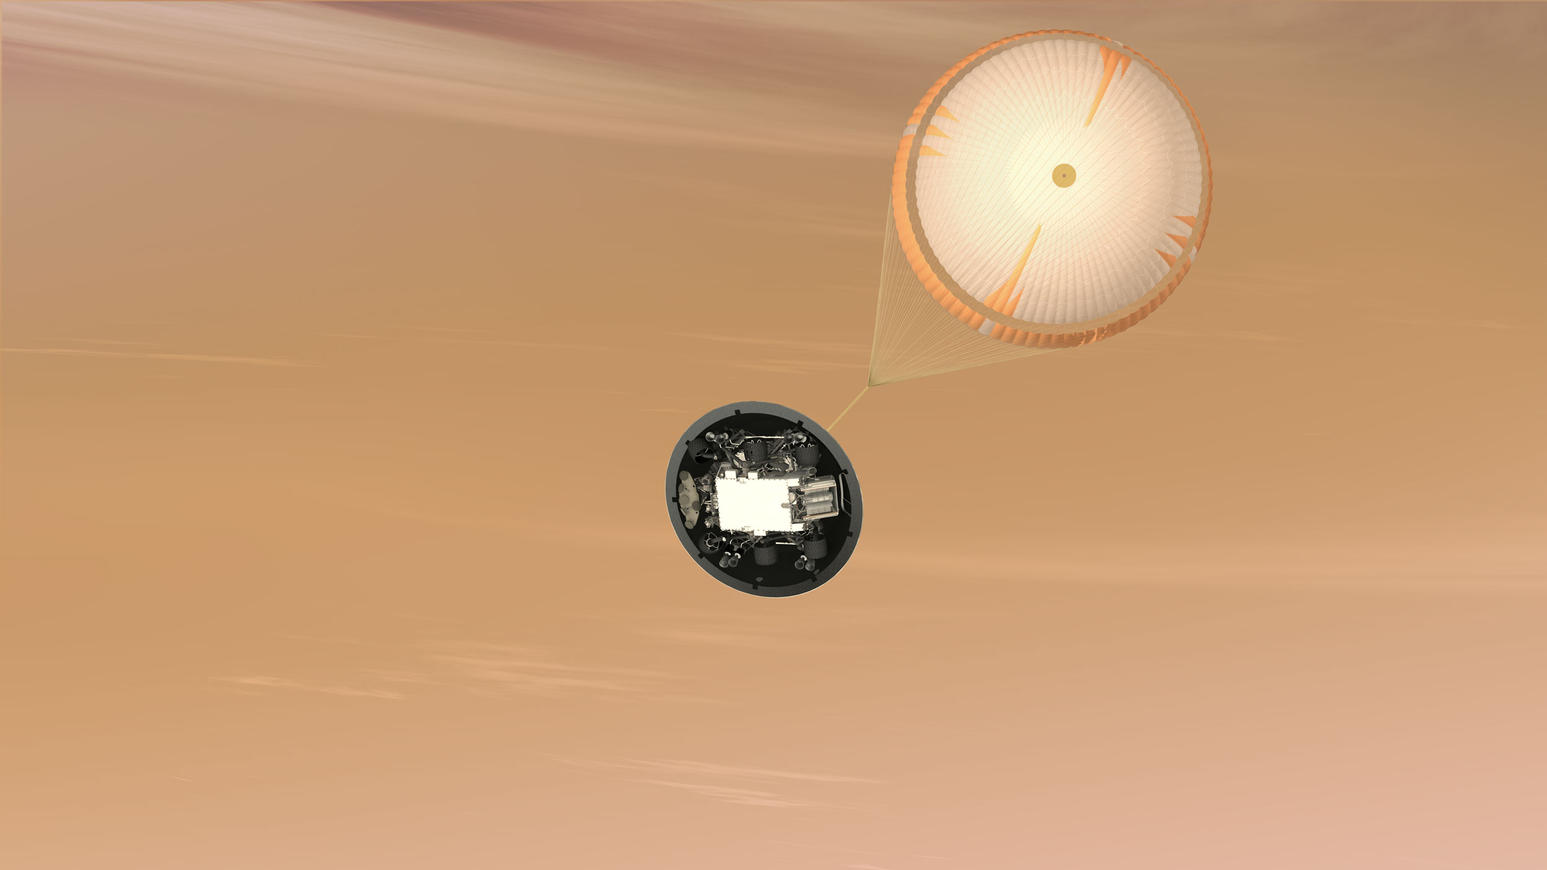 This is an artist's concept of the Mars Science Laboratory Curiosity rover parachute system.